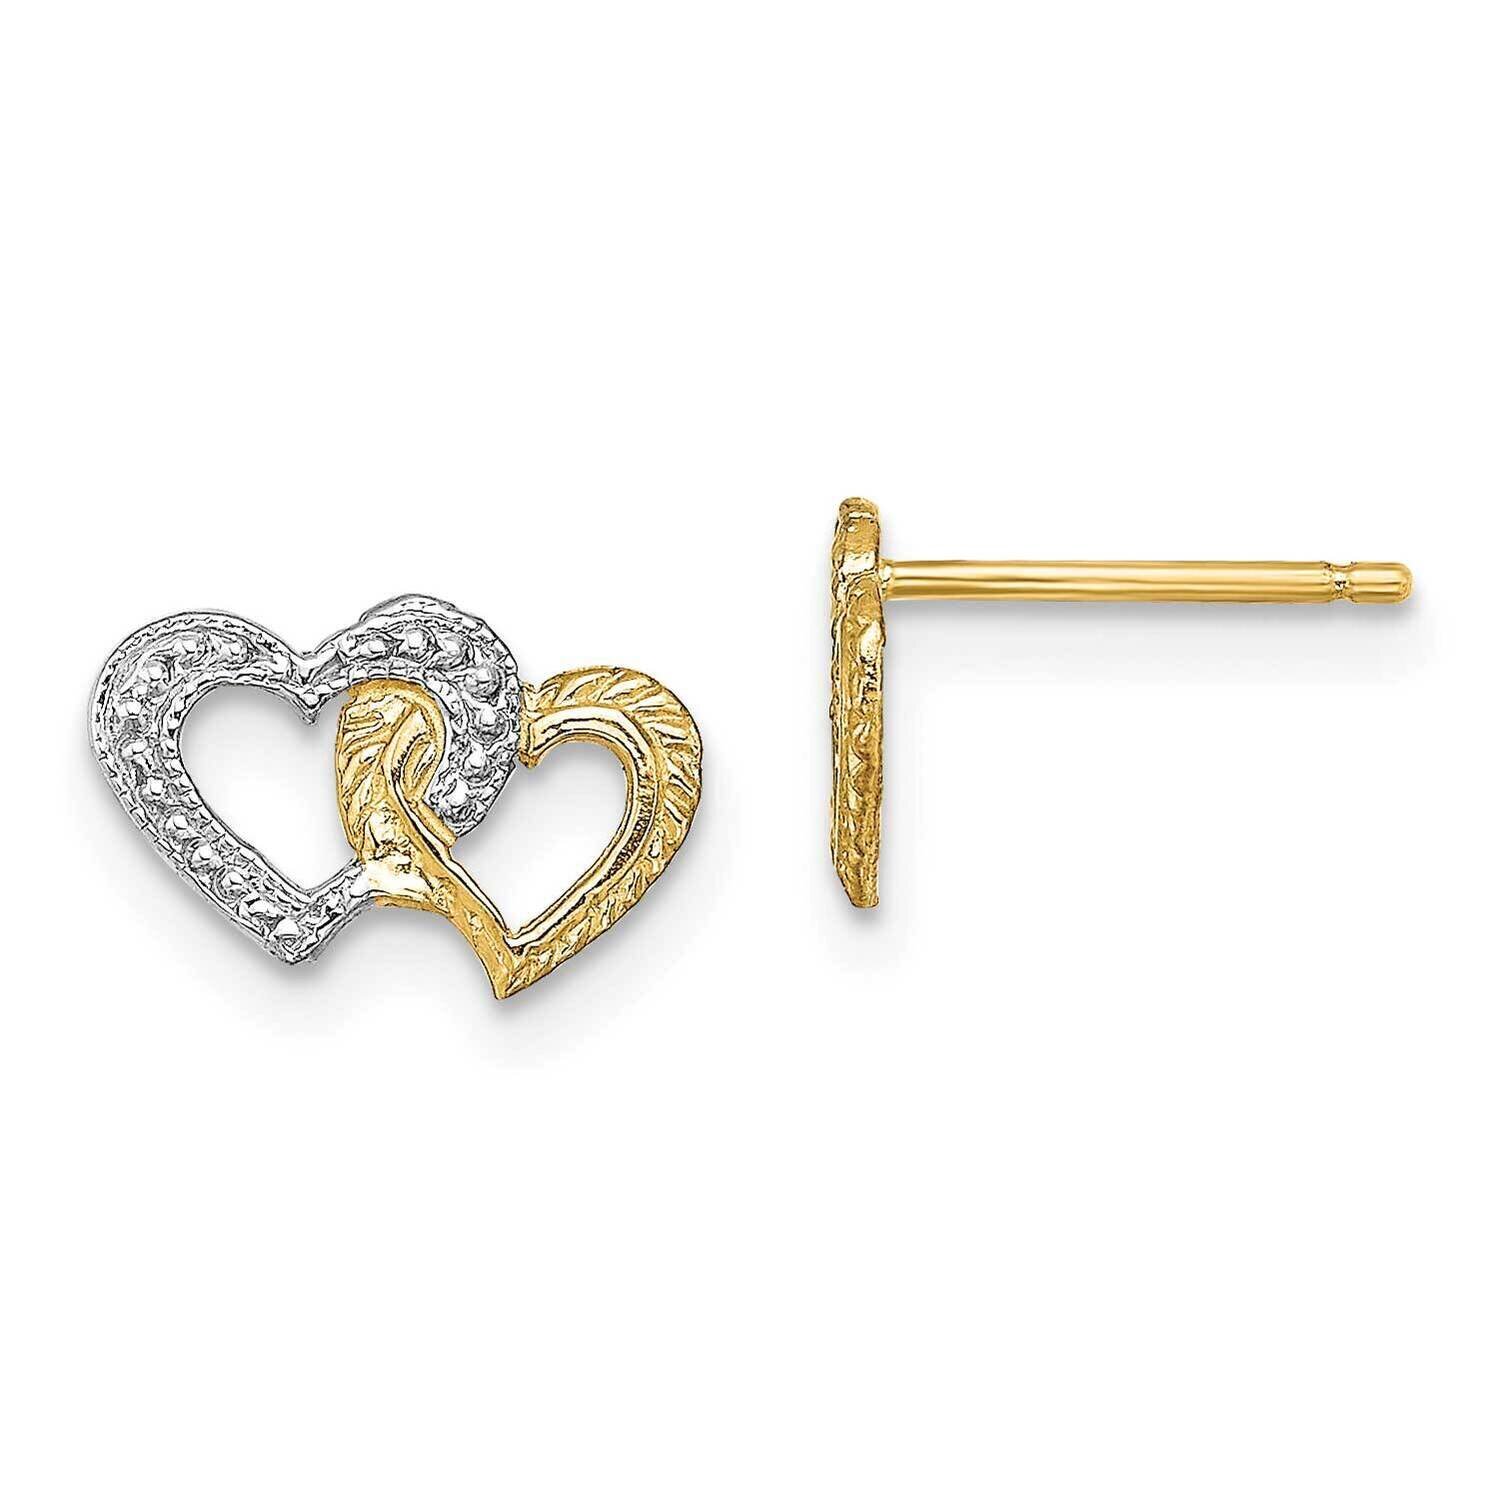 Intertwined Hearts Post Earrings 14k Gold & White Rhodium Polished TE904